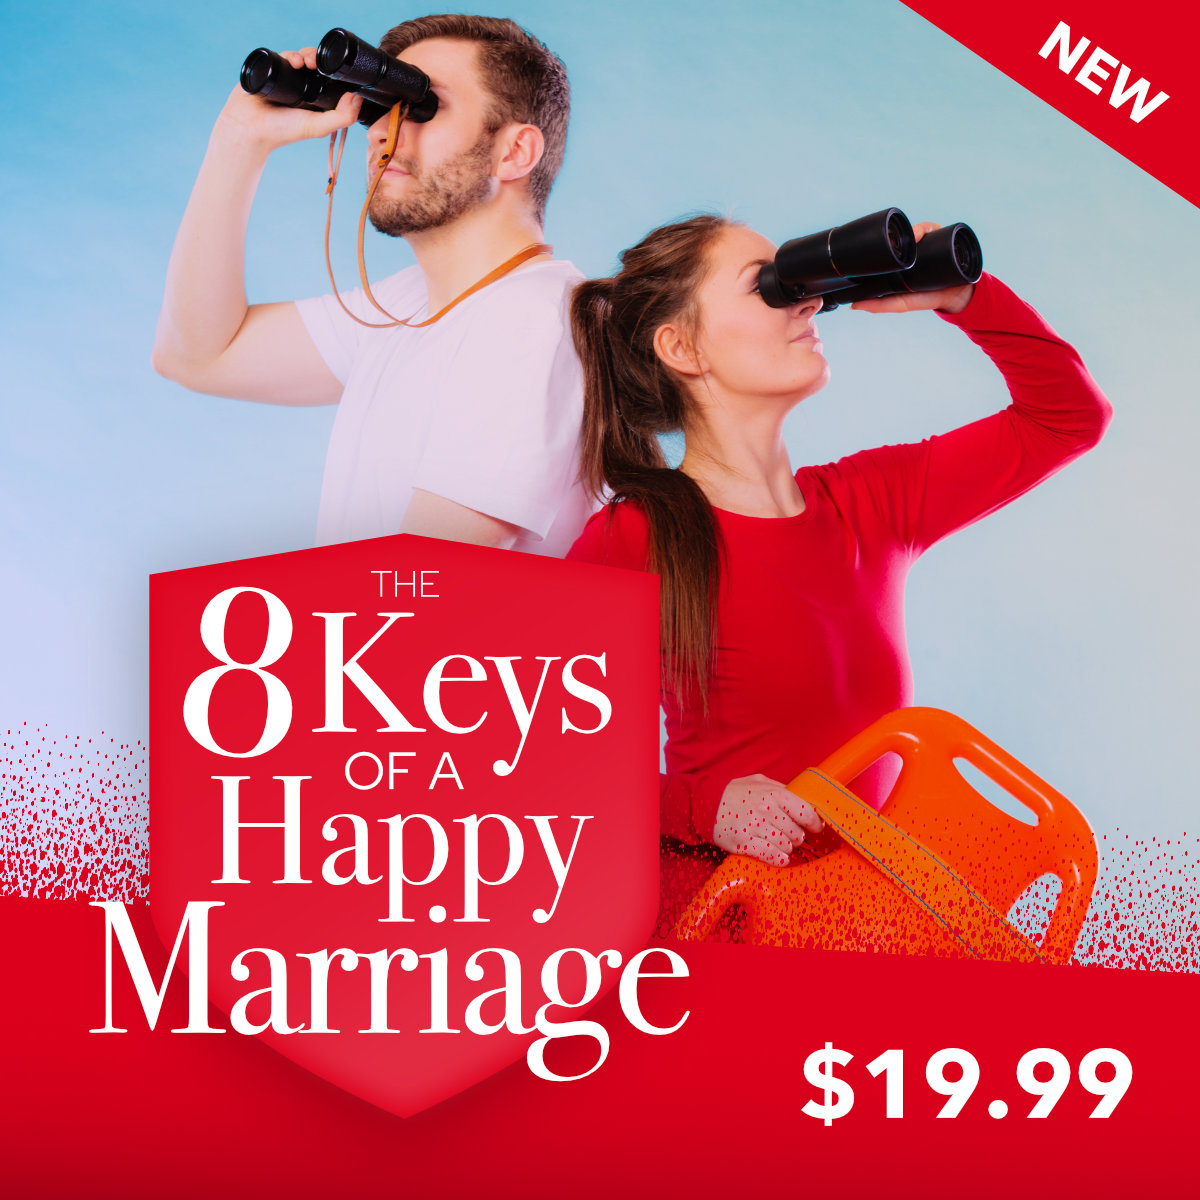 The 8 Keys to a Happy Marriage